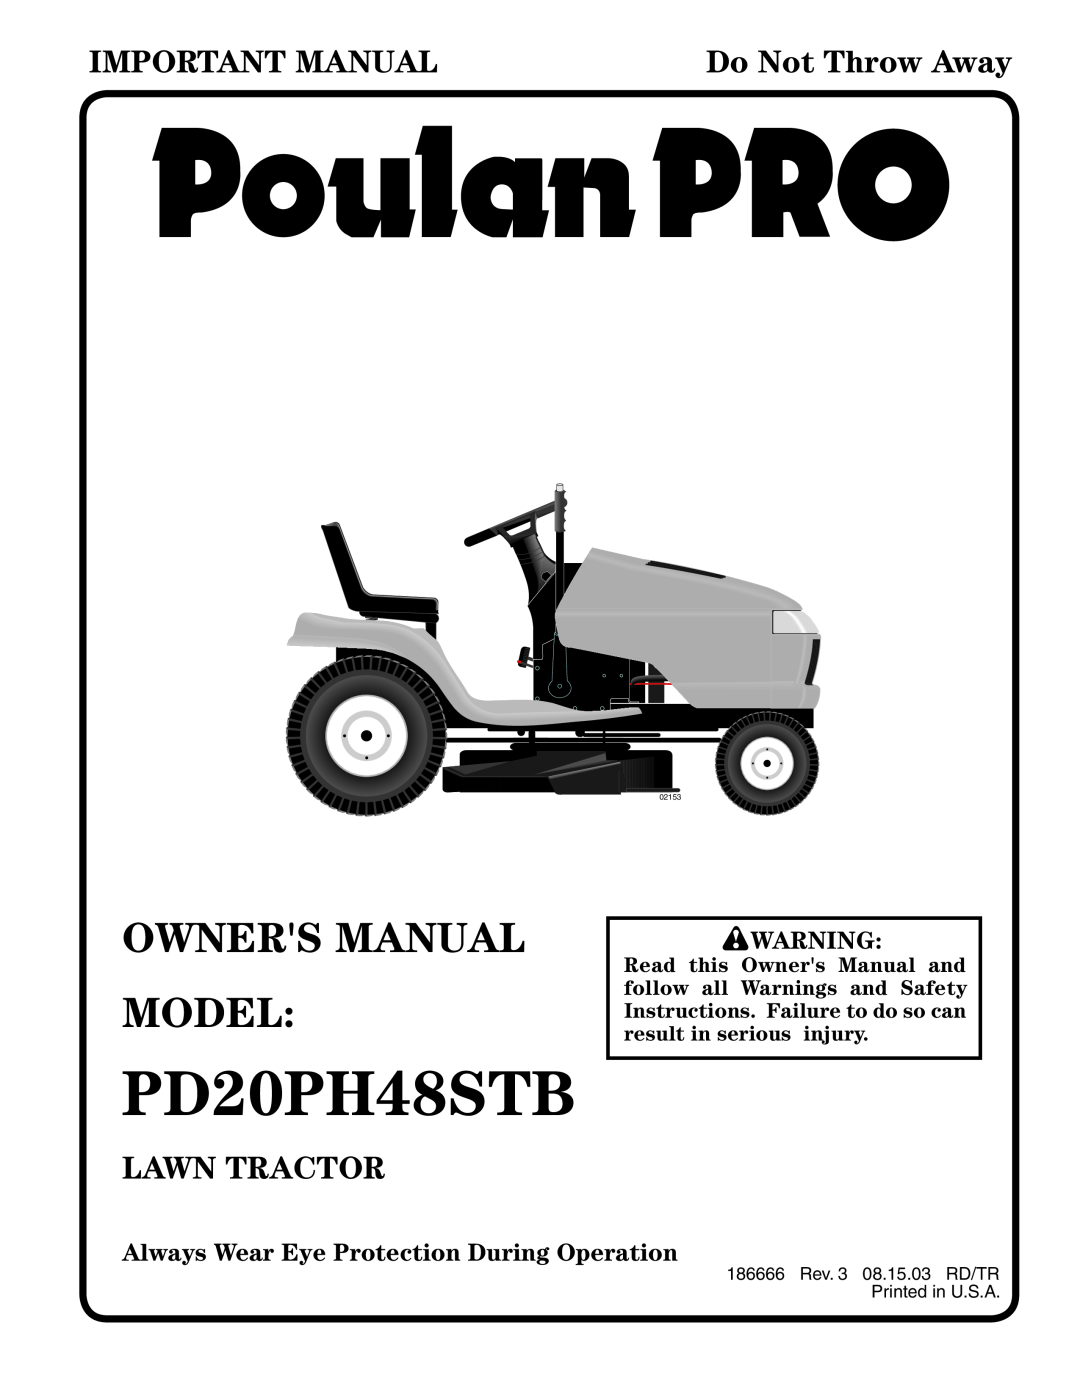 Poulan PD20PH48STB owner manual Owners Manual Model, Always Wear Eye Protection During Operation, Important Manual, 02153 